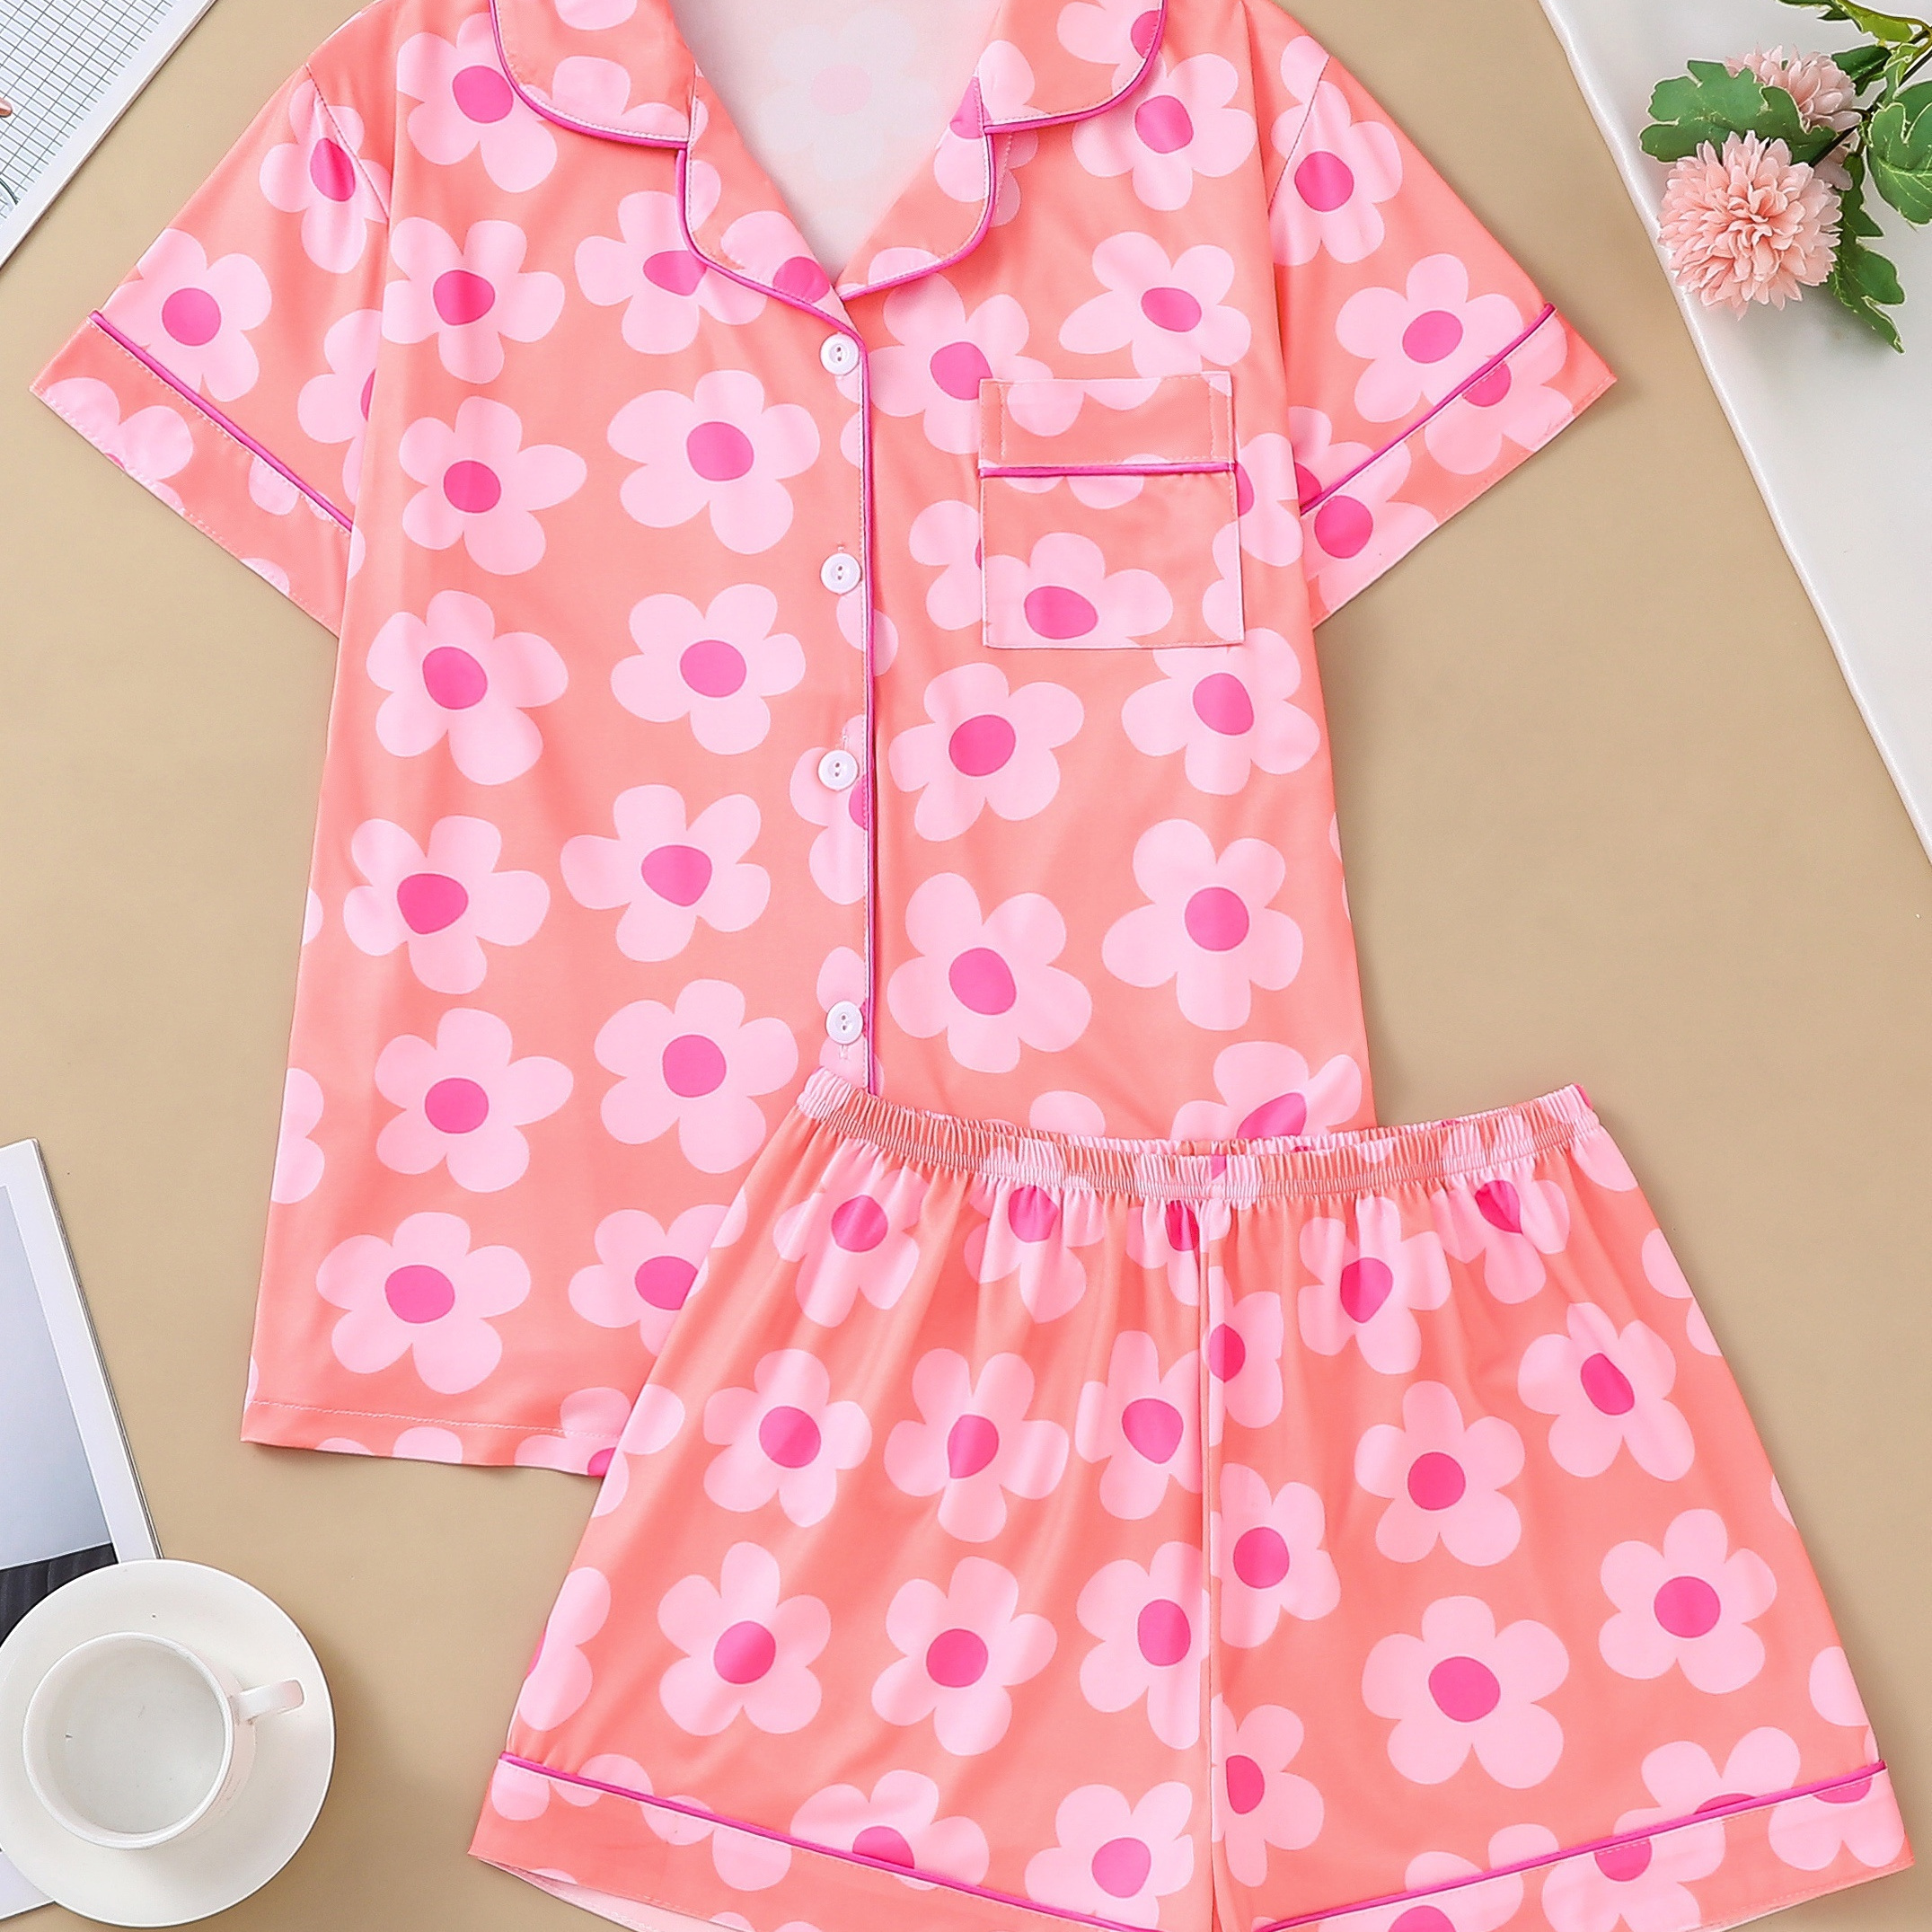 

Women's Floral Print Sweet Pajama Set, Short Sleeve Buttons Lapel Top & Shorts, Comfortable Relaxed Fit